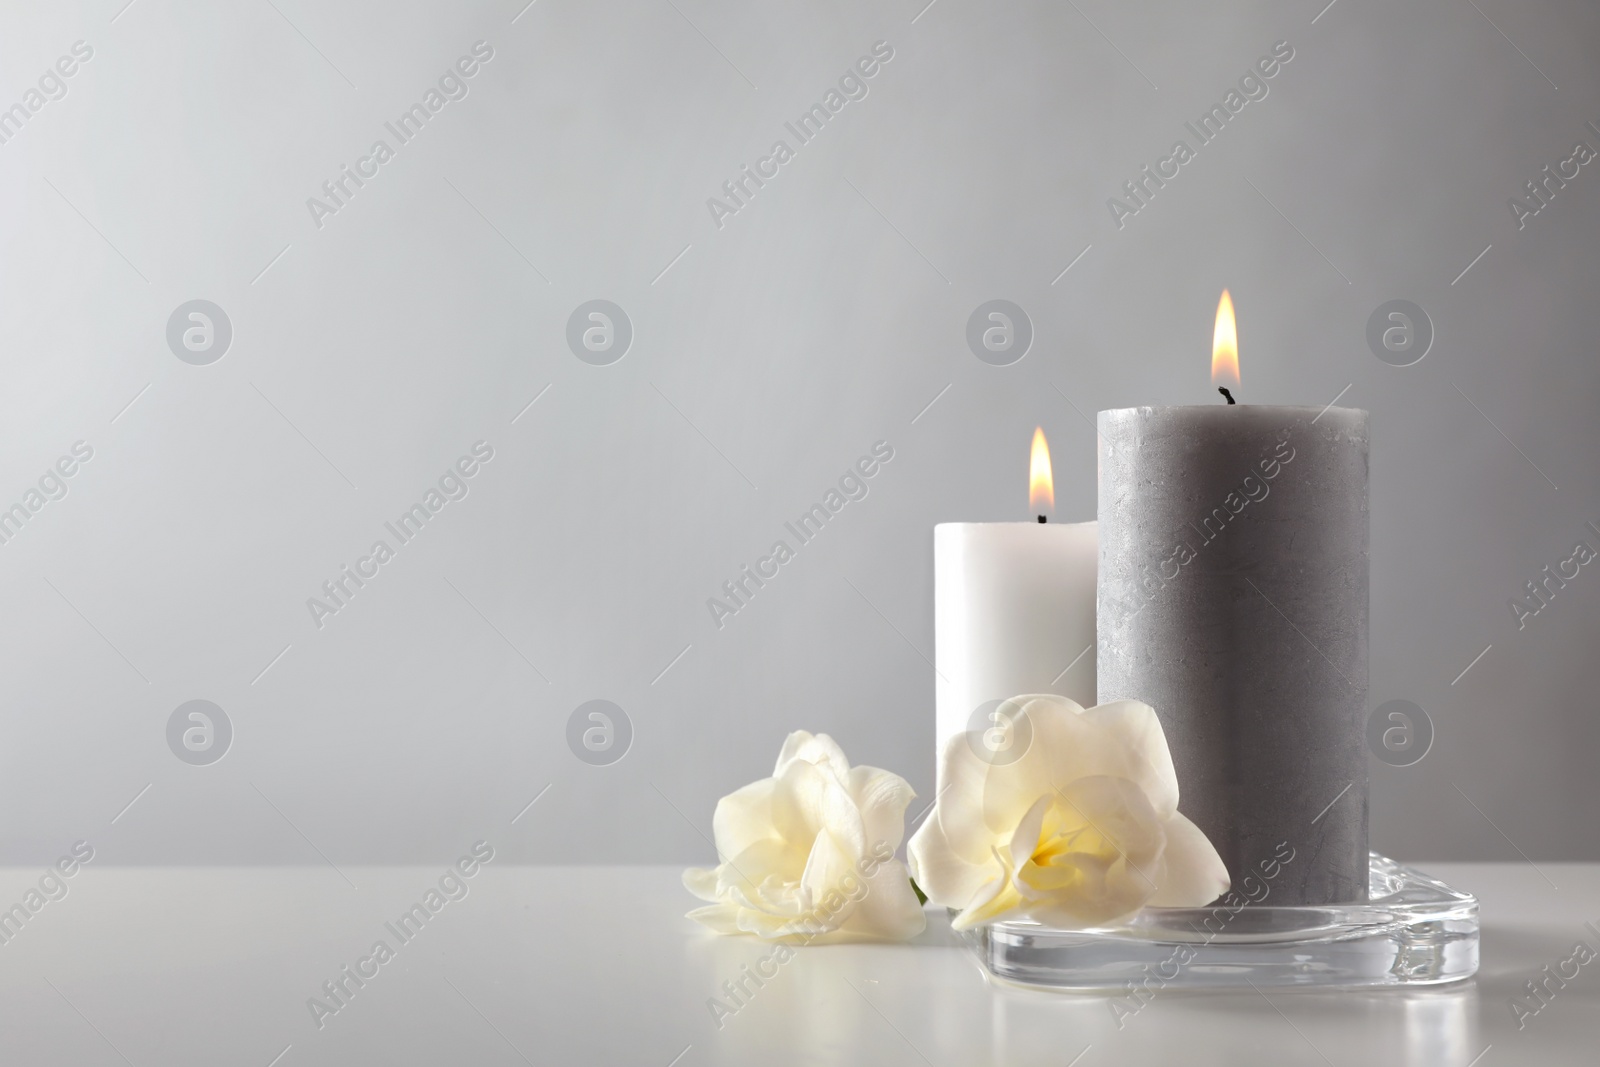 Photo of Wax candles and flowers in glass holder on table against light background. Space for text